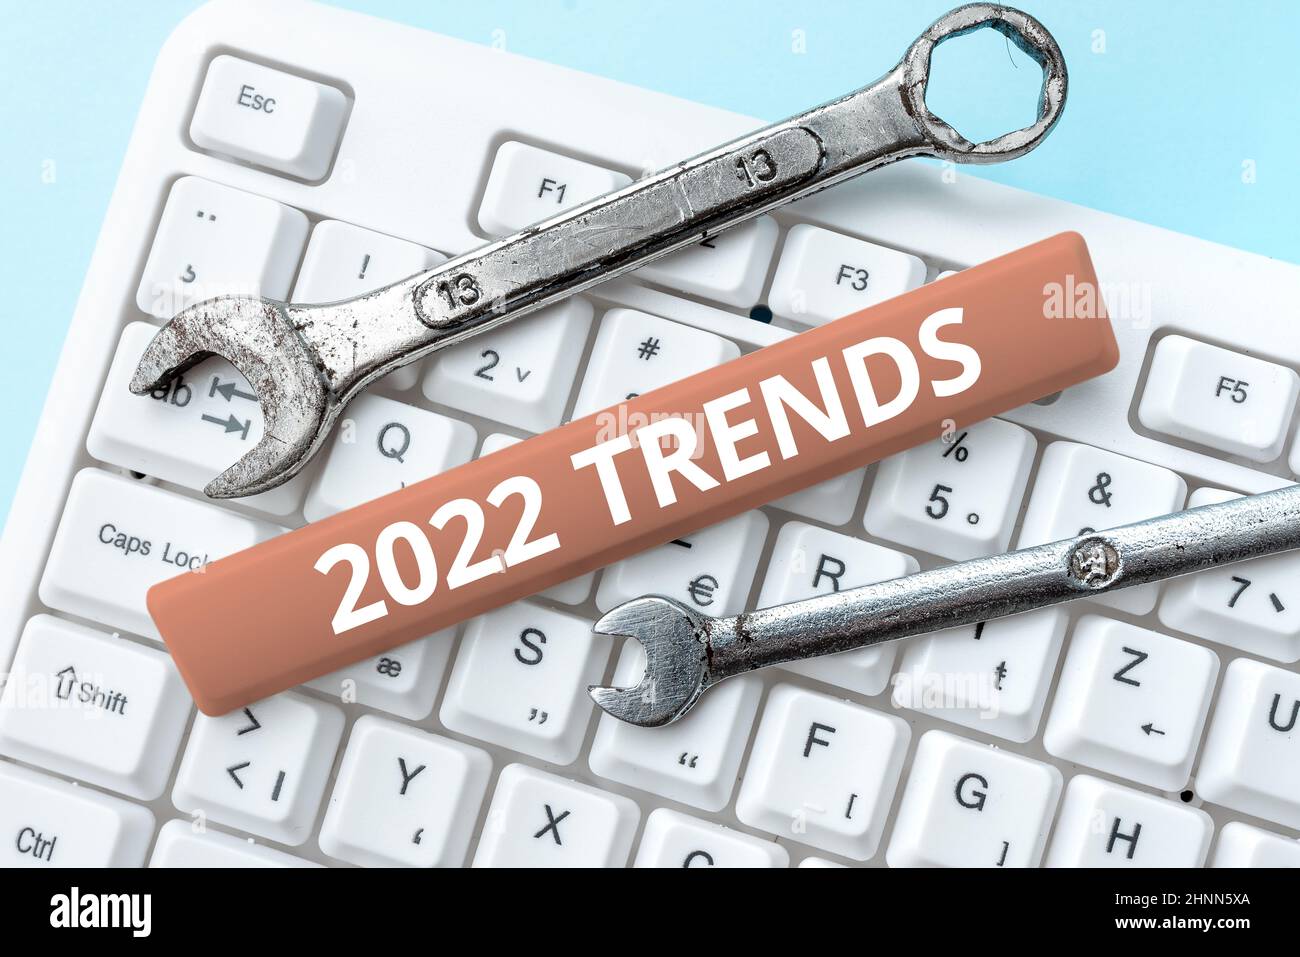 Text showing inspiration 2022 Trends. Business idea general direction in which something is developing or changing Abstract Fixing Outdated Websites, Maintaining Internet Connection Stock Photo